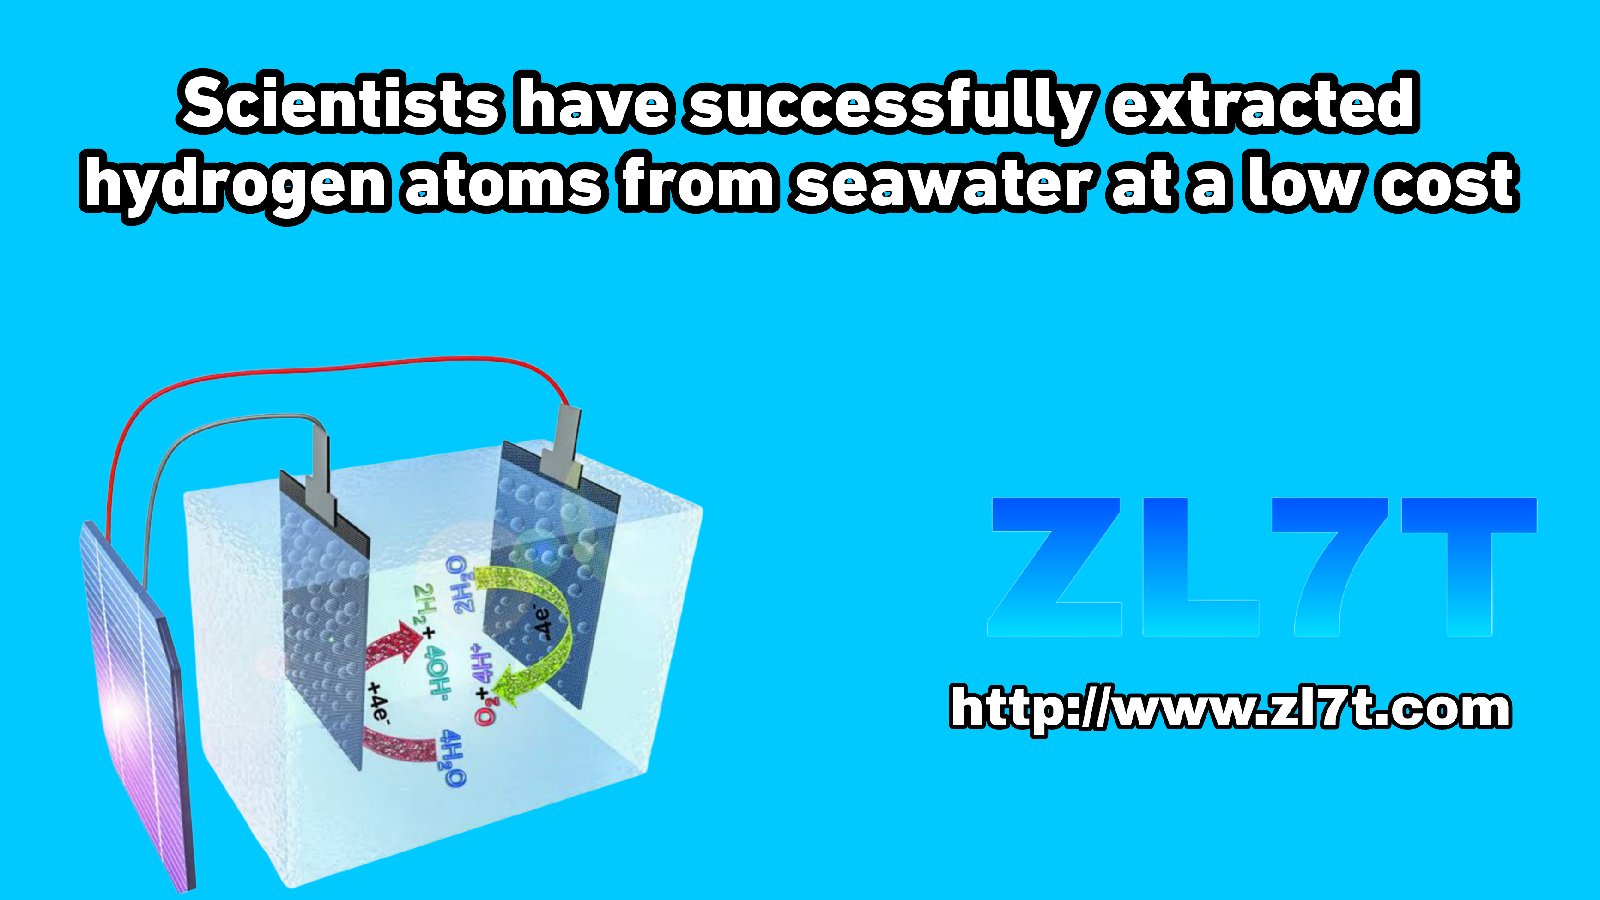 Scientists succeed in extracting hydrogen atoms from seawater at low cost